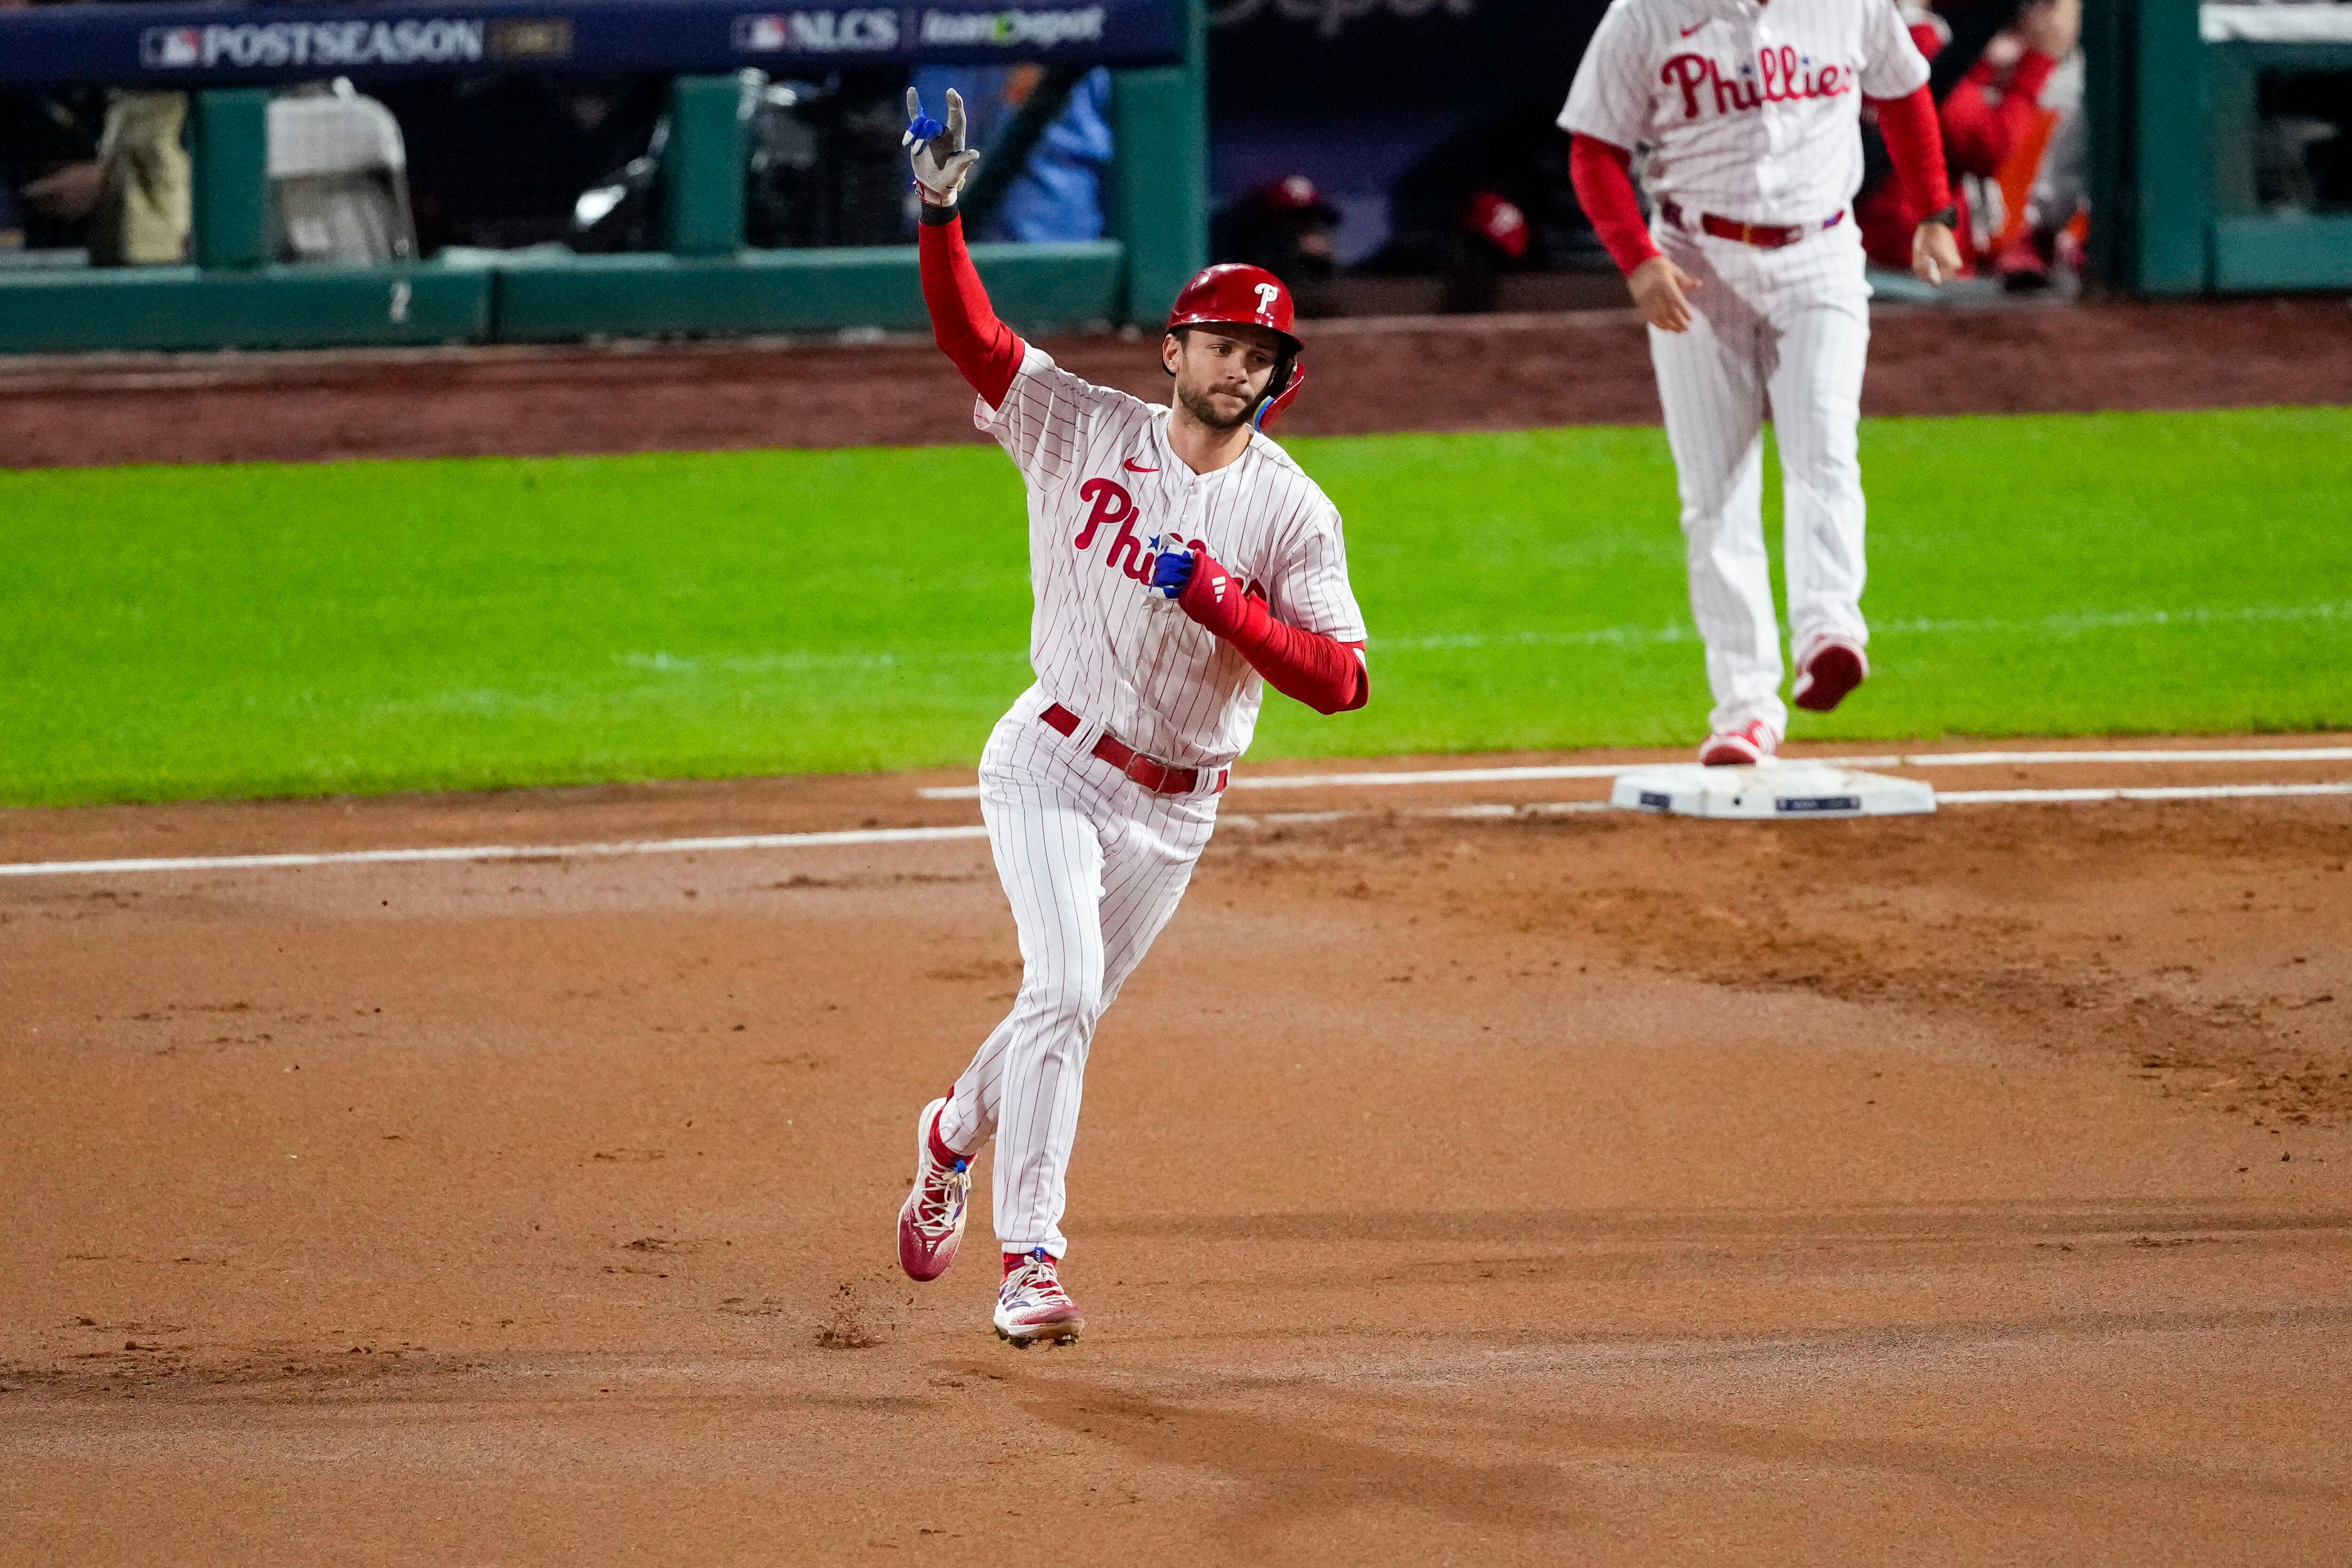 WATCH ALEC BOHM'S GREAT STAB AT 3RD FOR PHILS!